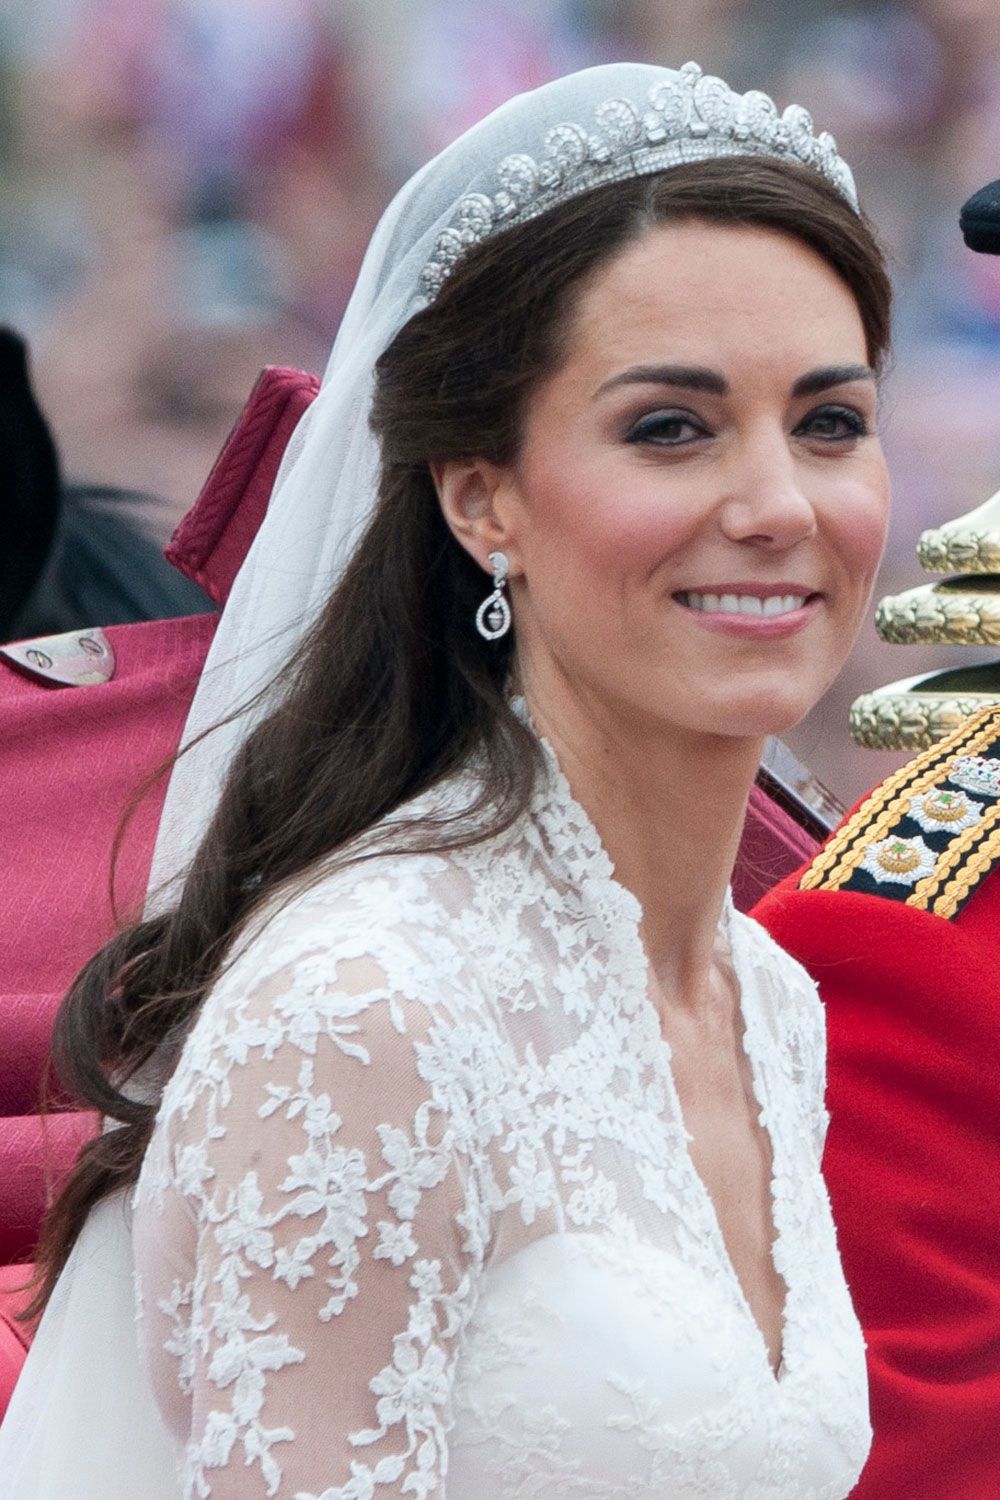 Aggregate 79+ kate middleton hairstyle wedding latest - in.eteachers